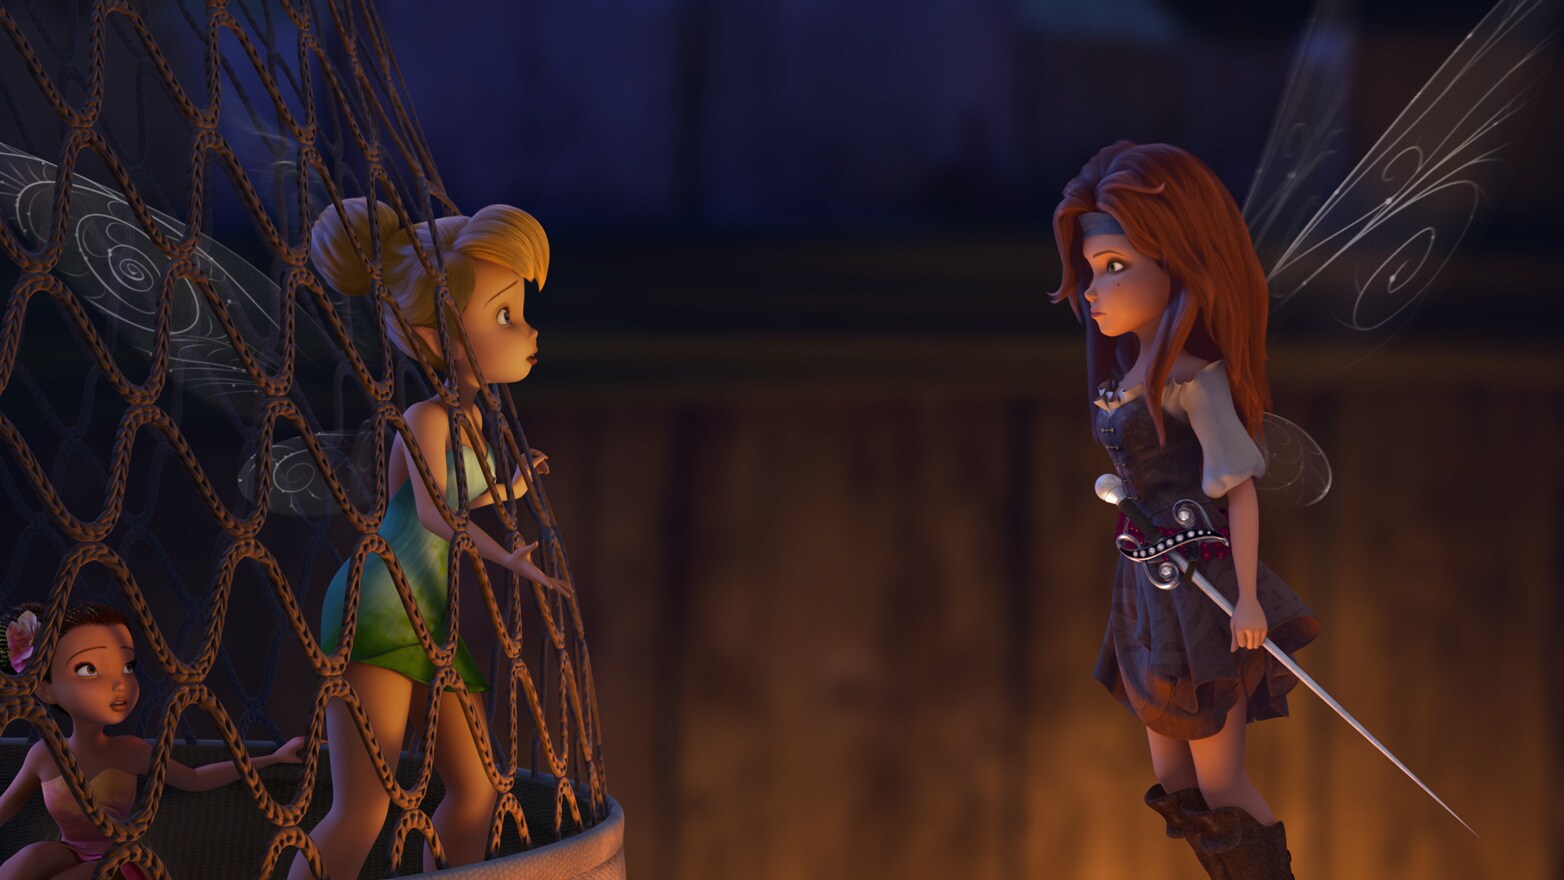 Zarina and Tinker Bell meet face-to-face on the pirate ship.